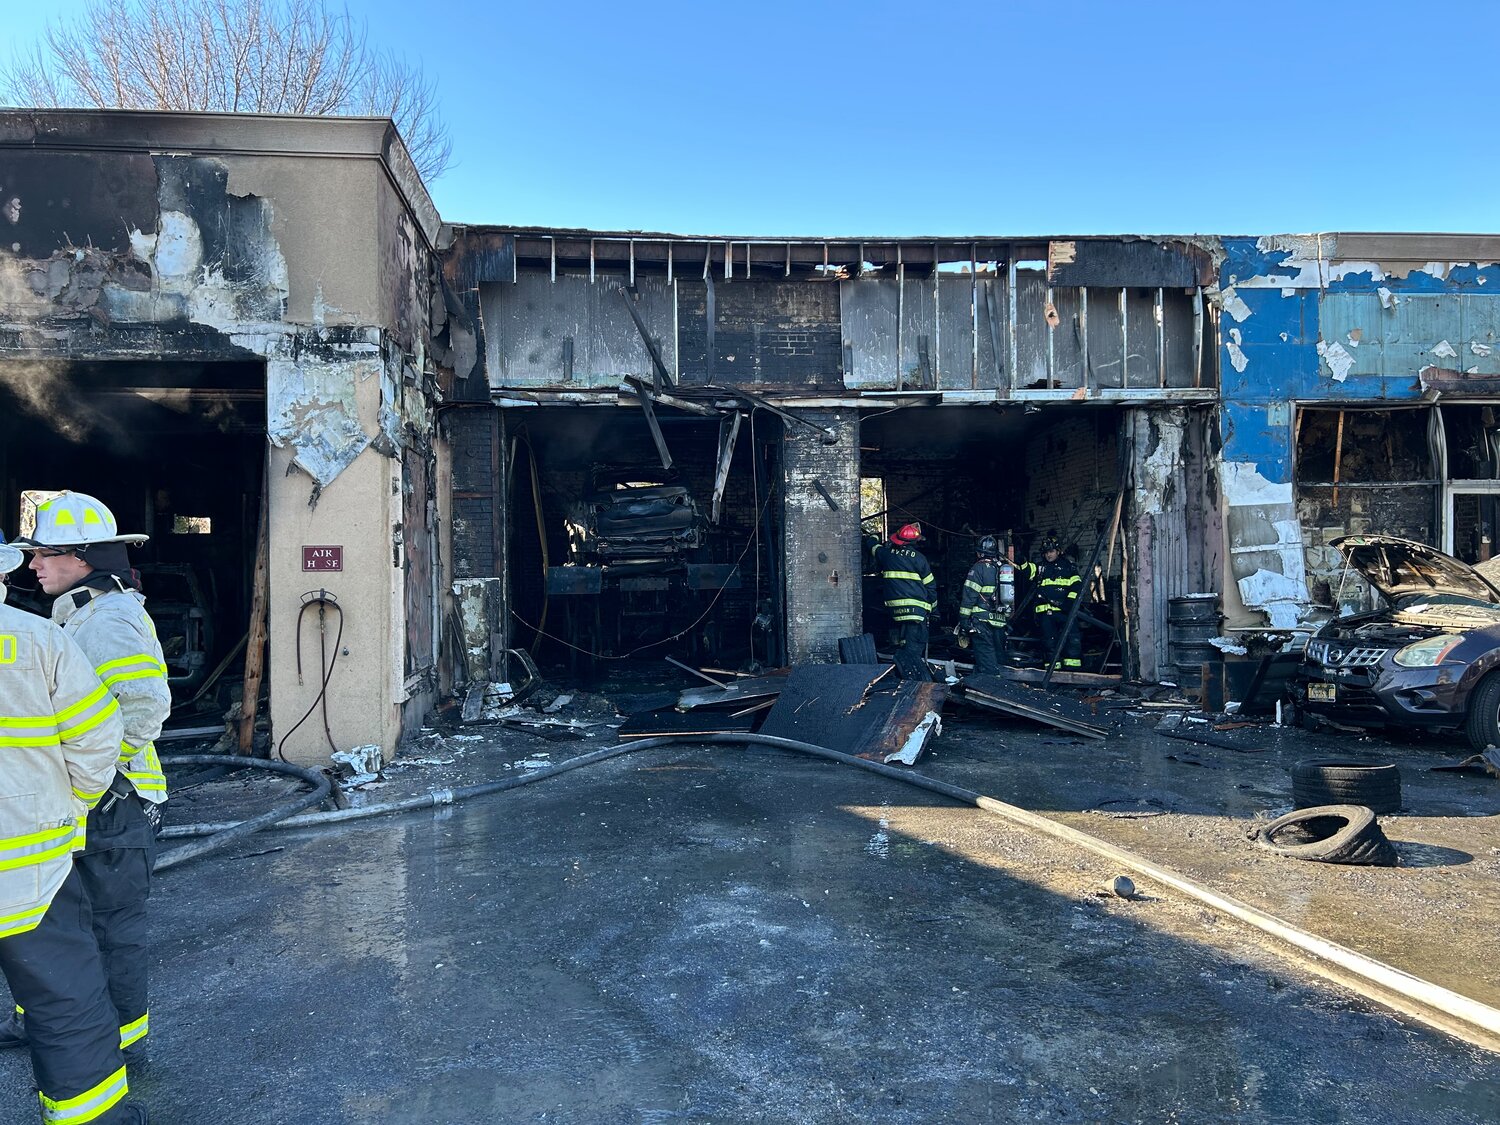 Local firefighters had the blaze under control by 1:30 p.m. The structure of the auto mechanic, however, was severely damaged as a result.